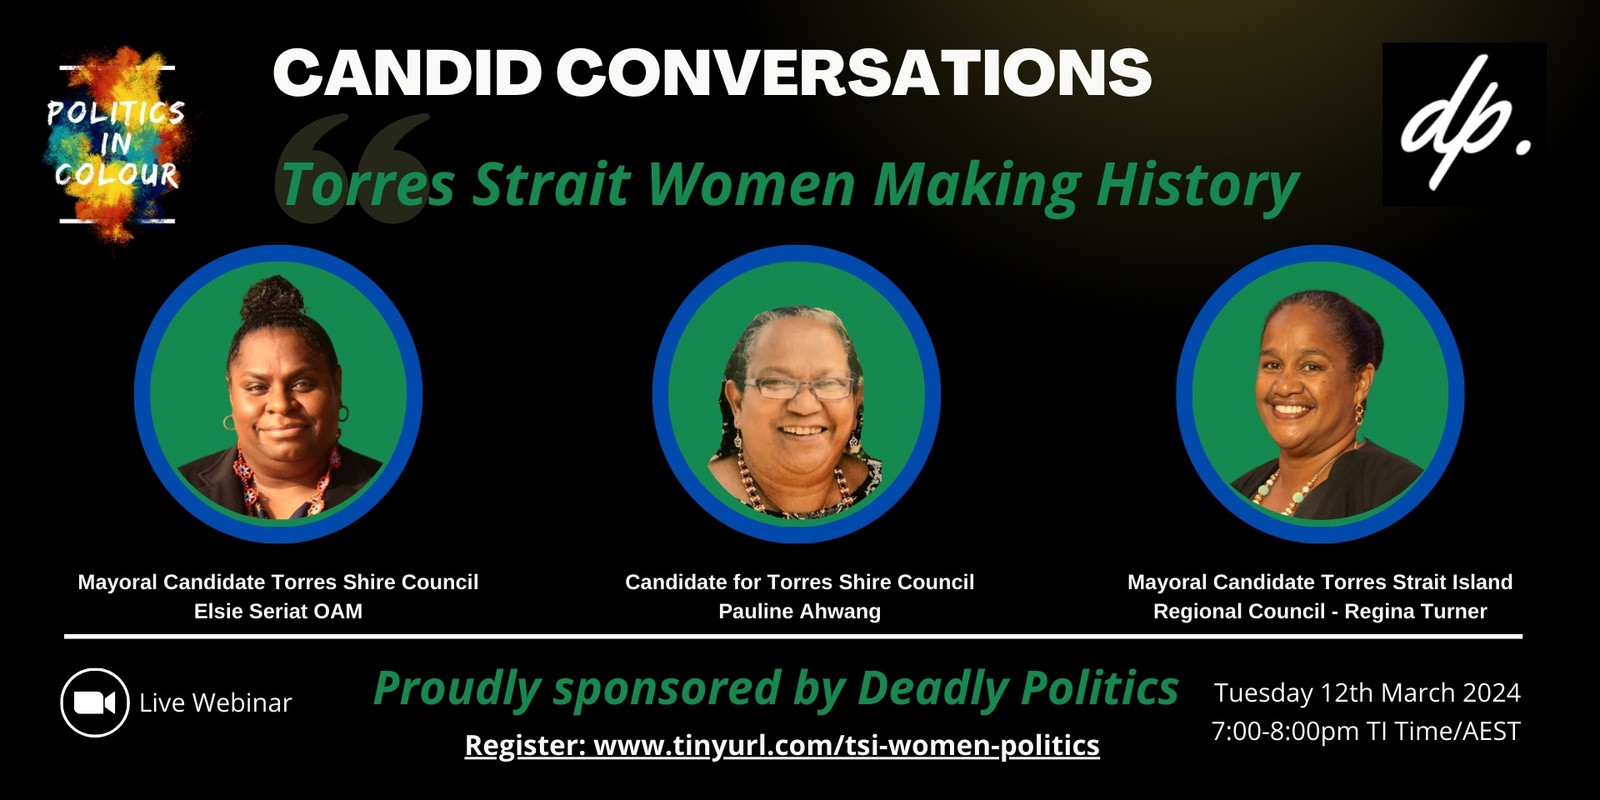 Banner image for Candid Conversations - Torres Strait Women Making History